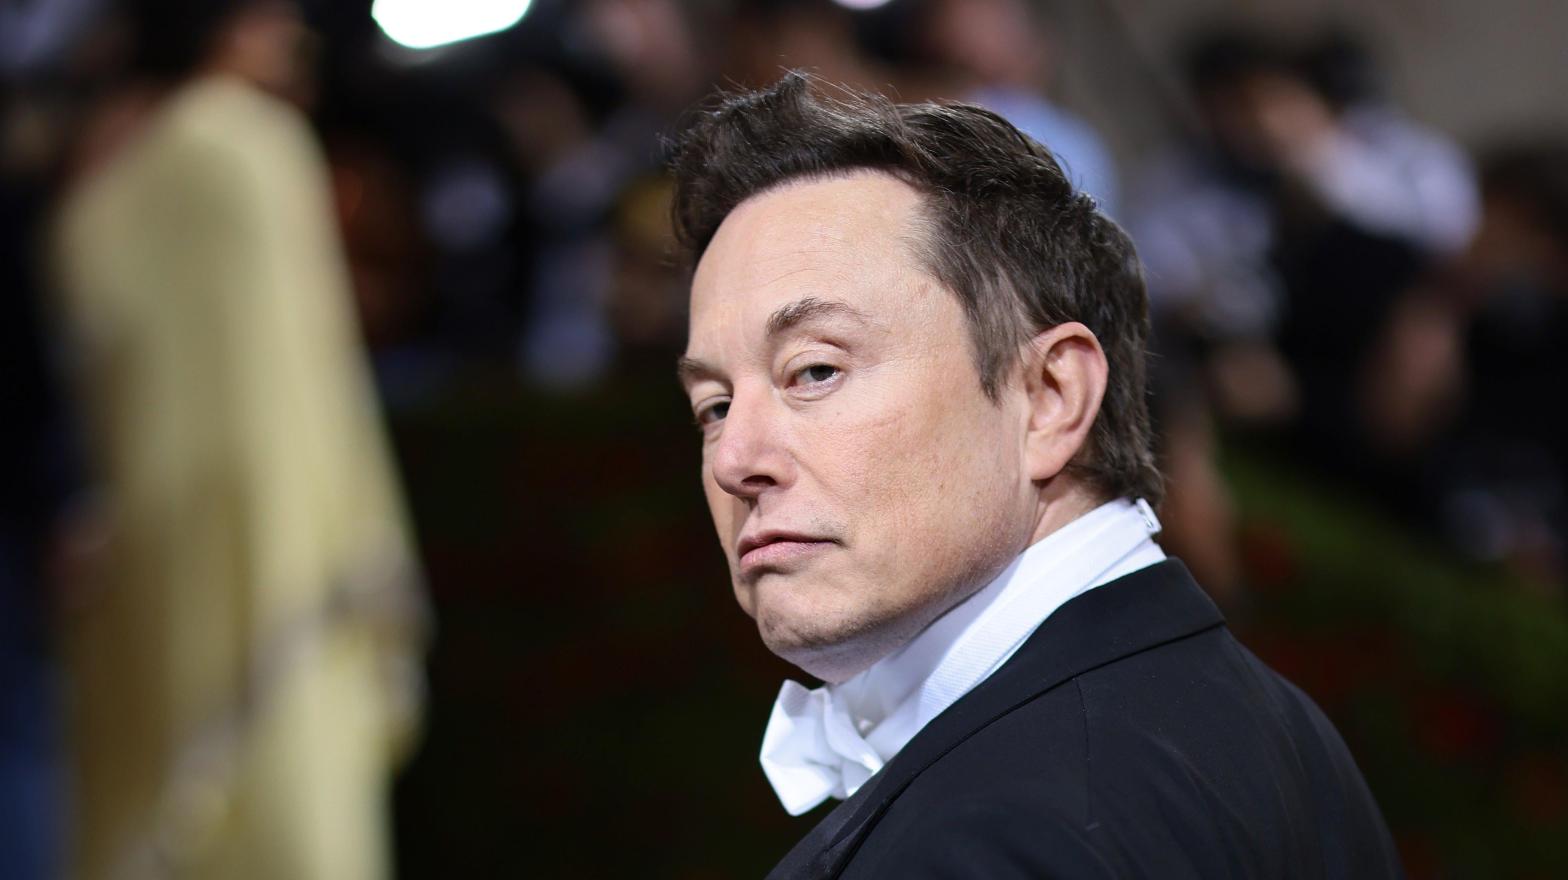 Future Twitter owner Elon Musk shared another unimpressive idea to grow the social network's business. (Photo: Dimitrios Kambouris/The Met Museum/Vogue, Getty Images)